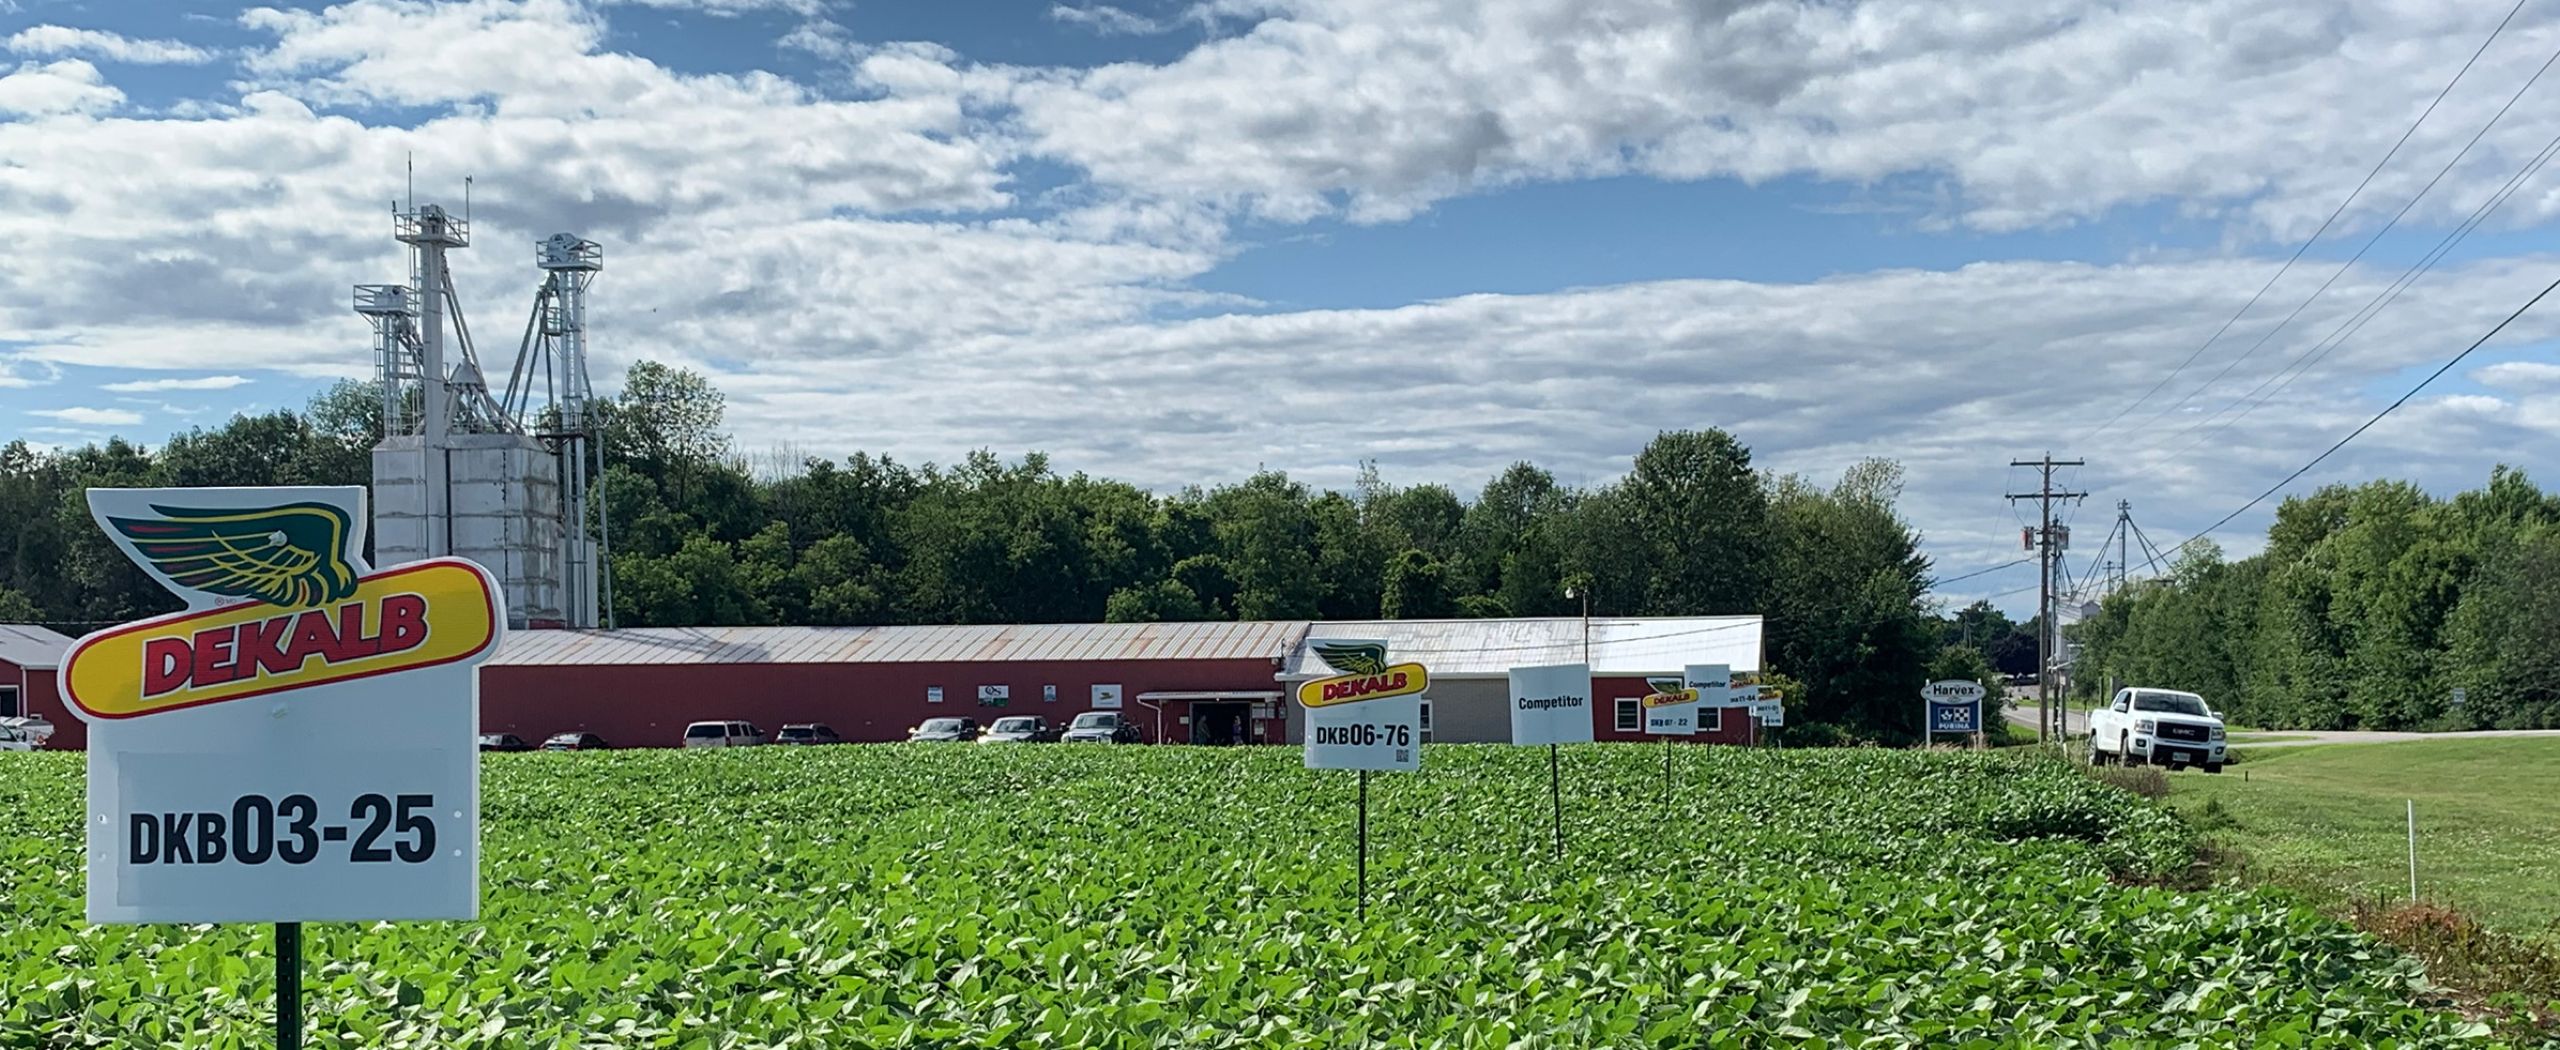 Harvex Agromart crop and location with Dekalb sign